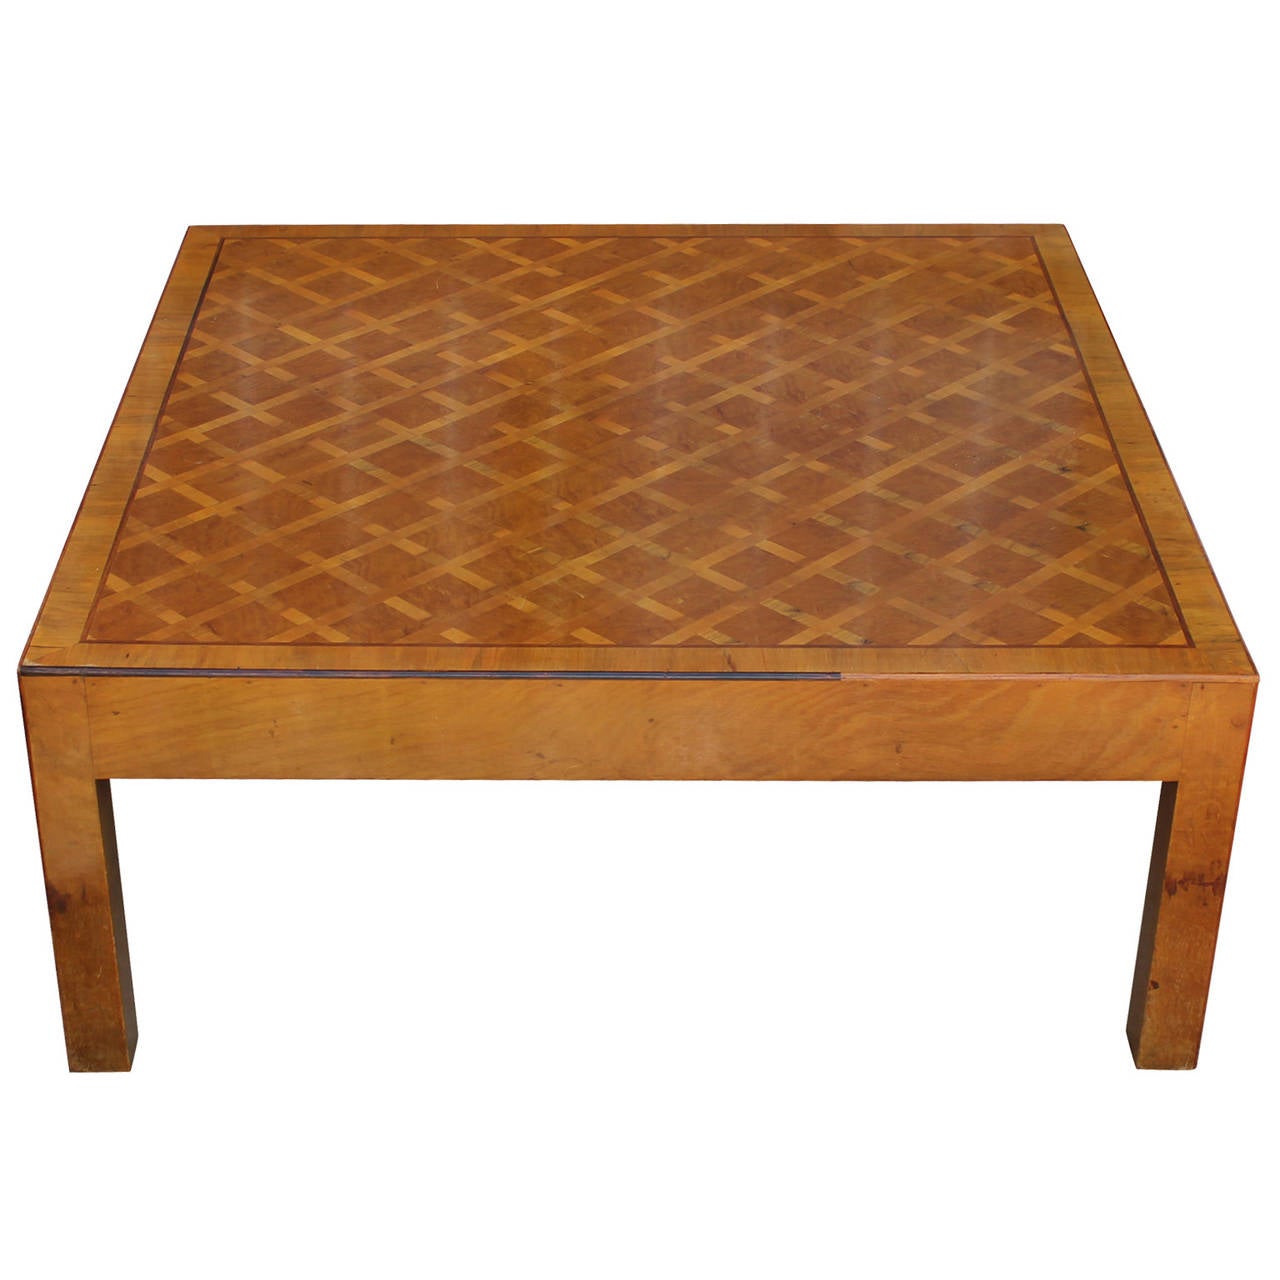 Fabulous Parsons style coffee table. Table top has a beautiful inlaid grid pattern. Clean lines and an extraordinary attention to detail make this coffee table the perfect transitional piece. Veneer is in excellent condition.